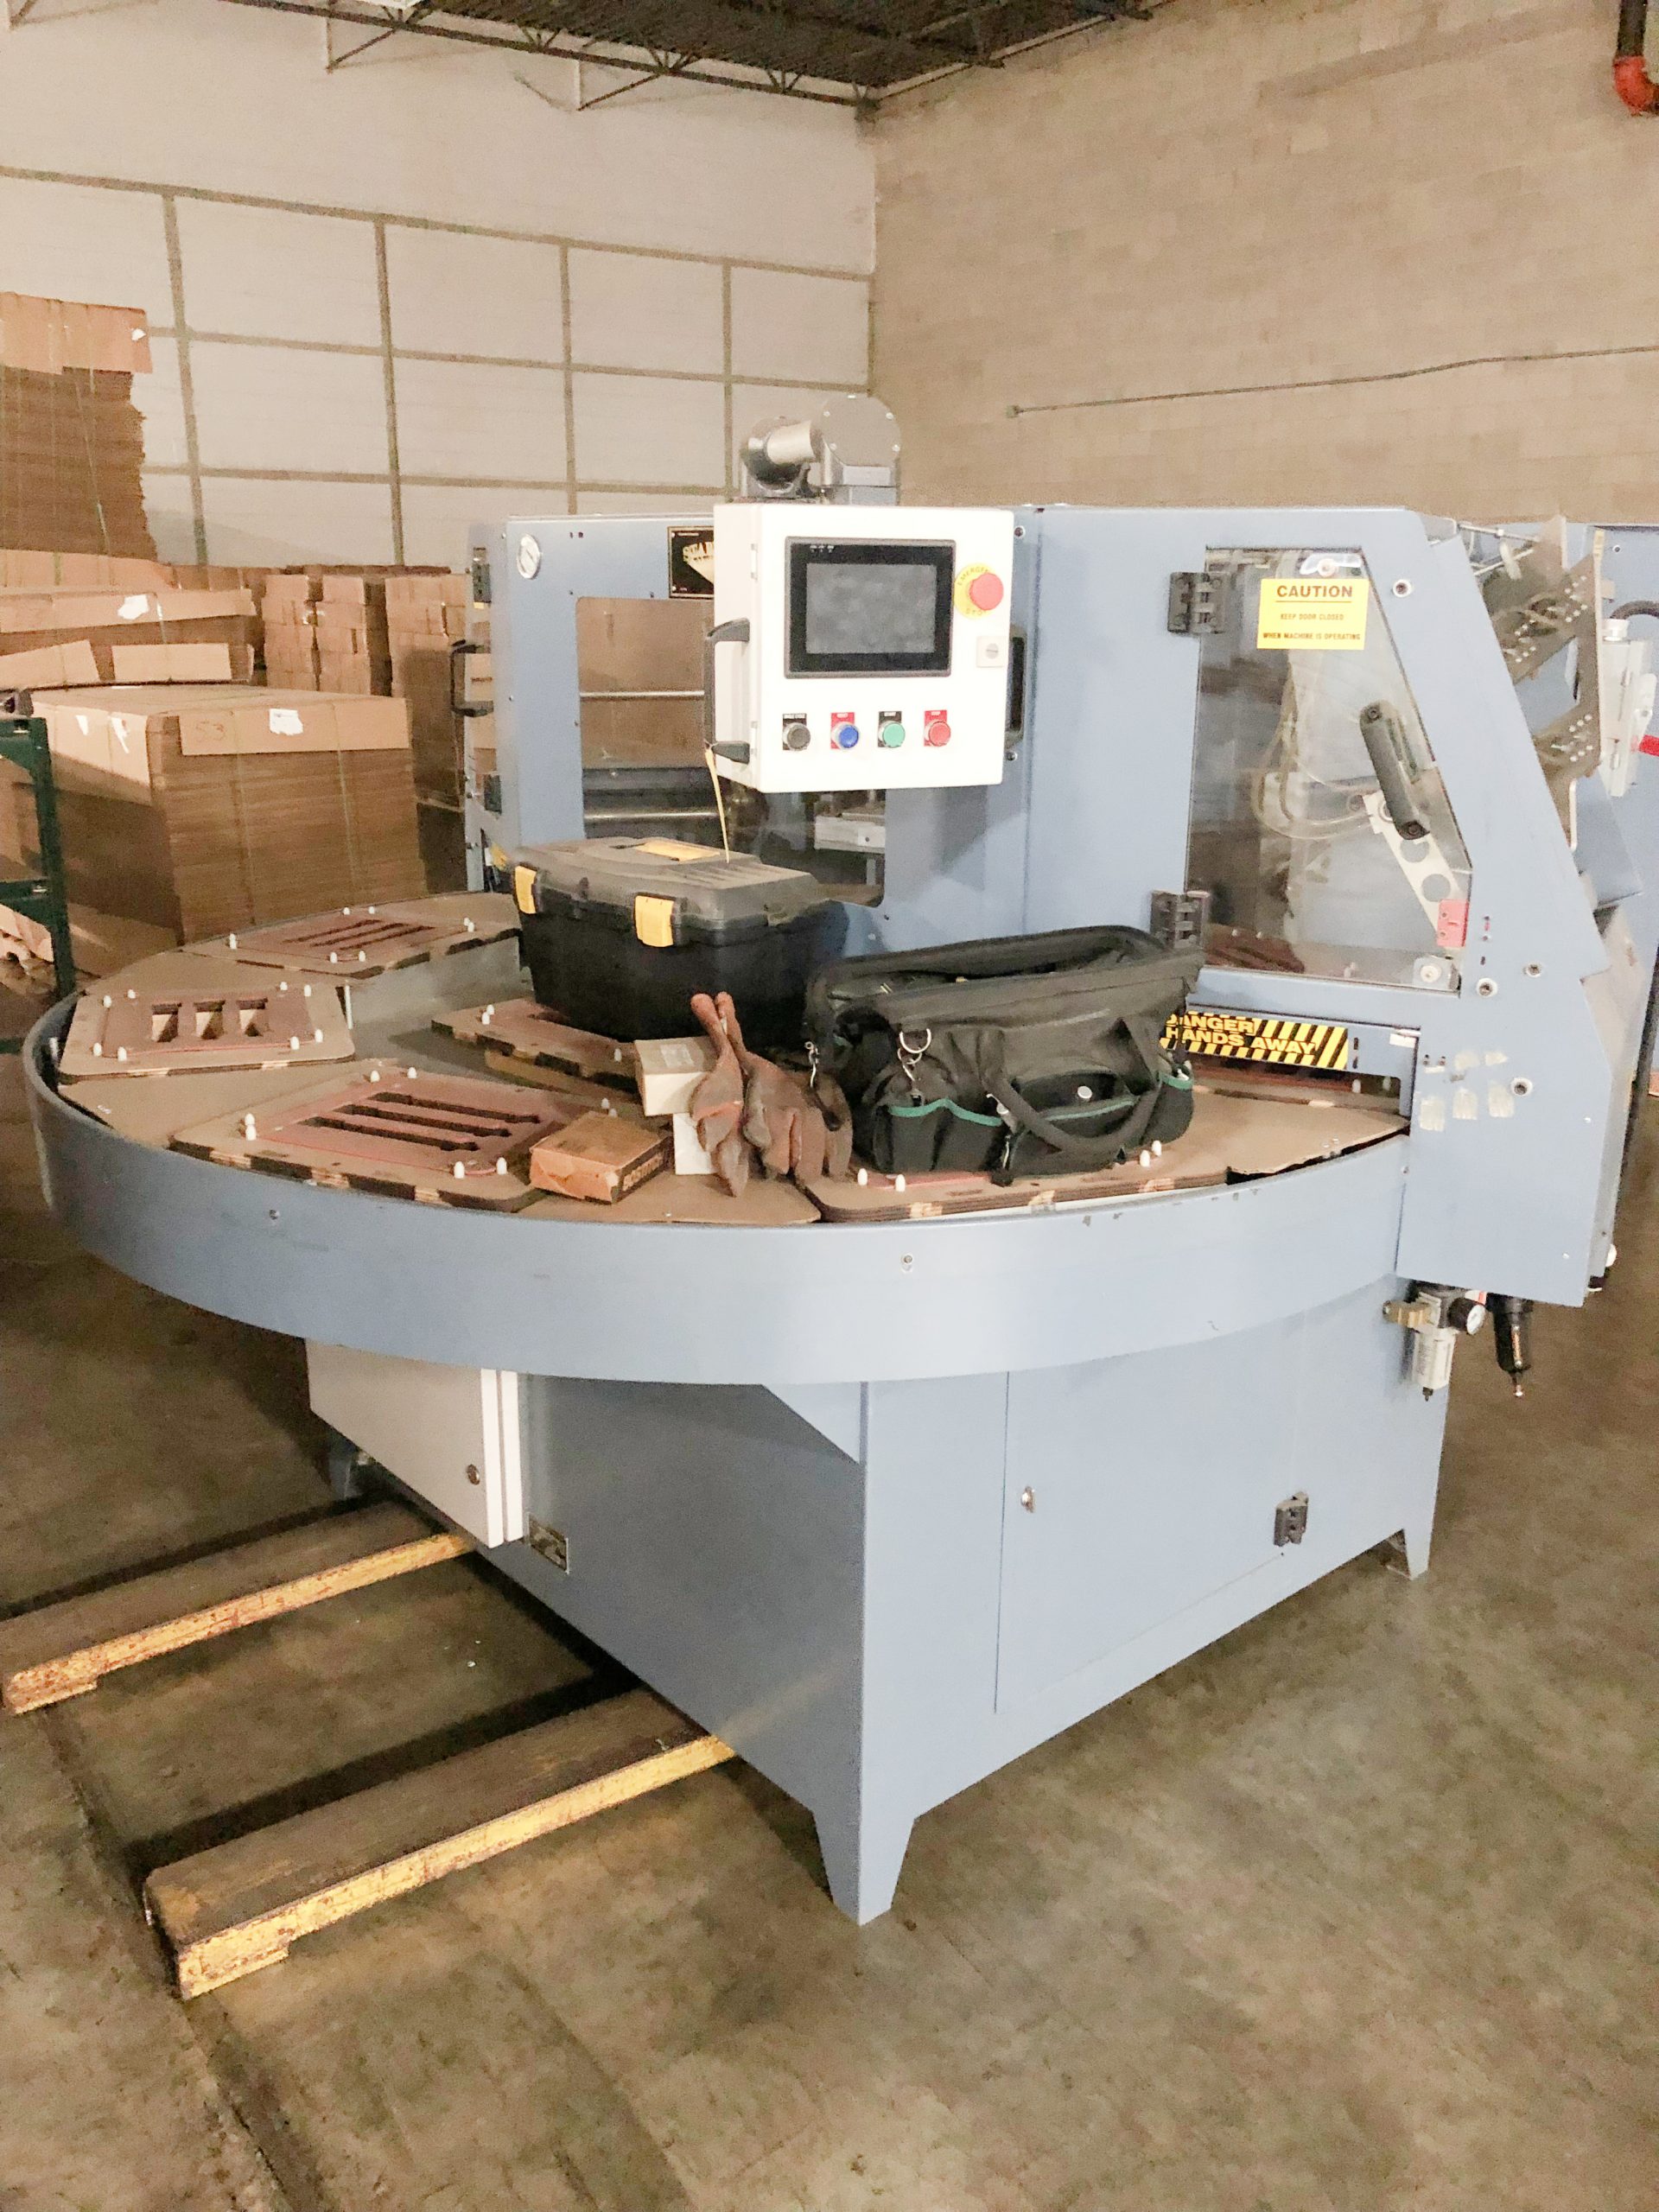 Equipment Lot: Stairview Clamshell PHS6-14-18 Machine, Beseler 4530-MTB-SL Packaging Machine, Seal-A-Tron Machine, Stairview Blister Sealer, Beseler L-Bar Sealer, Besler Shrink Tunnel, Nordson DuraBlue 4L Glue Machine, Highlight Magnum 1300 TB-U 2″ Top and Bottom Drive Case / Carton Sealer, & Eagle T200 3″ Semi-Automatic Uniform Case Sealer / Tape Machine (Used) Item # UE-011222E (Wisconsin)